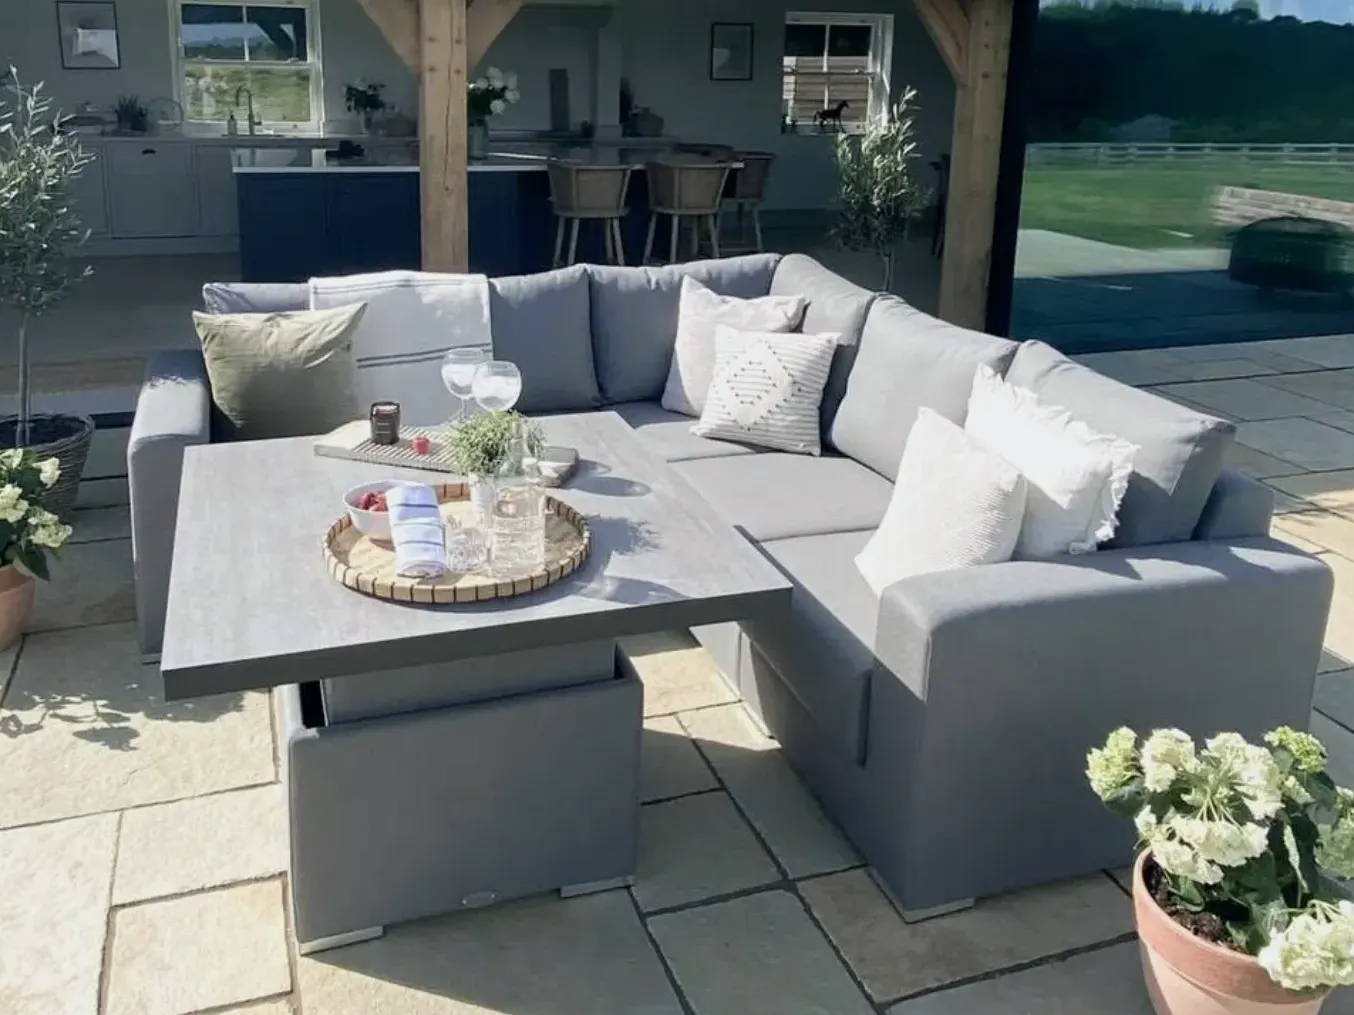 Outdoor modular sofa made from outdoor fabrics with adjustable table.